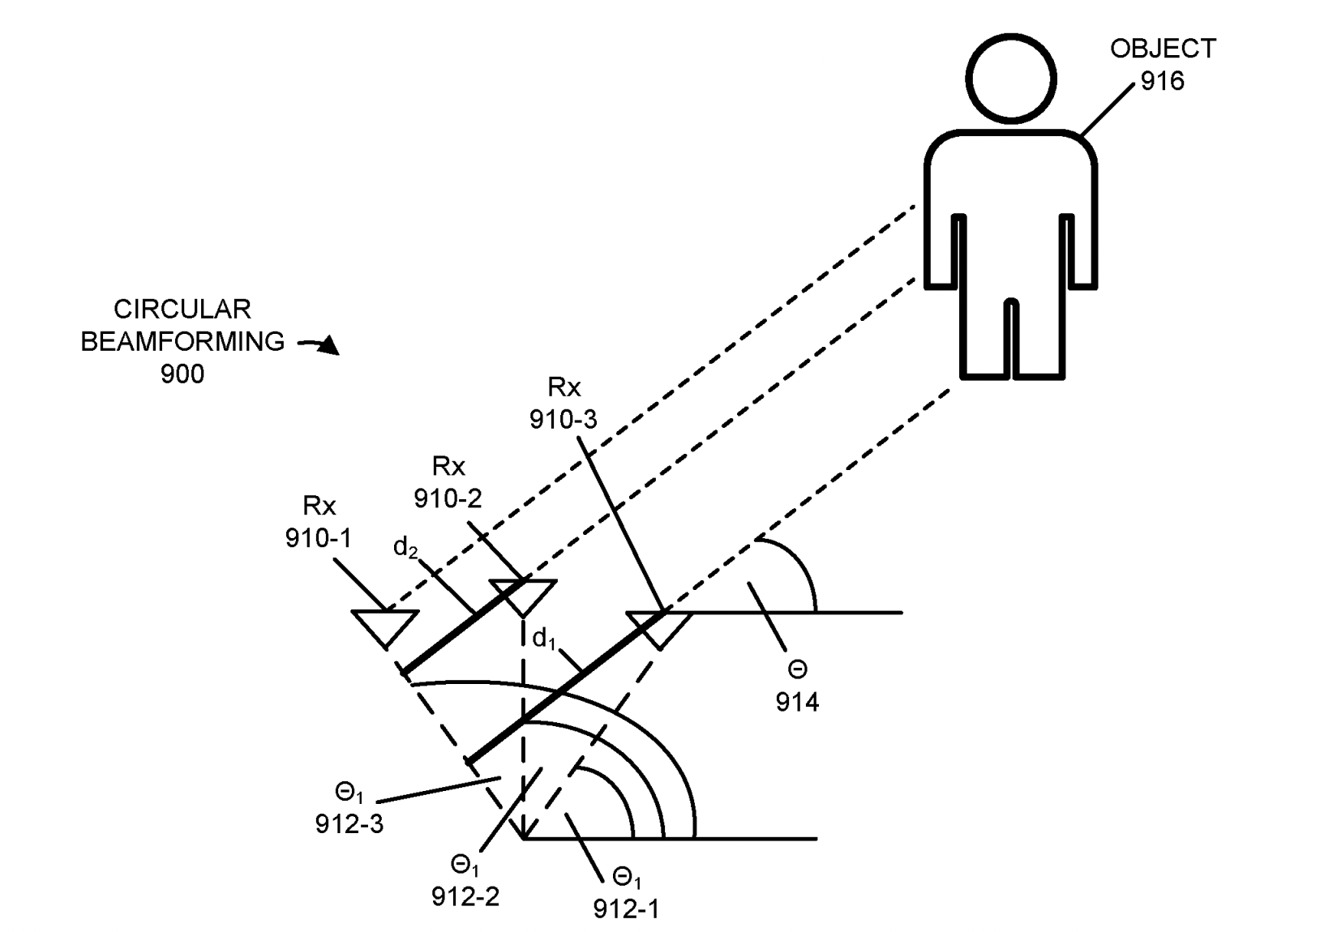 An illustration of circular beamforming detecting a nearby object or person.